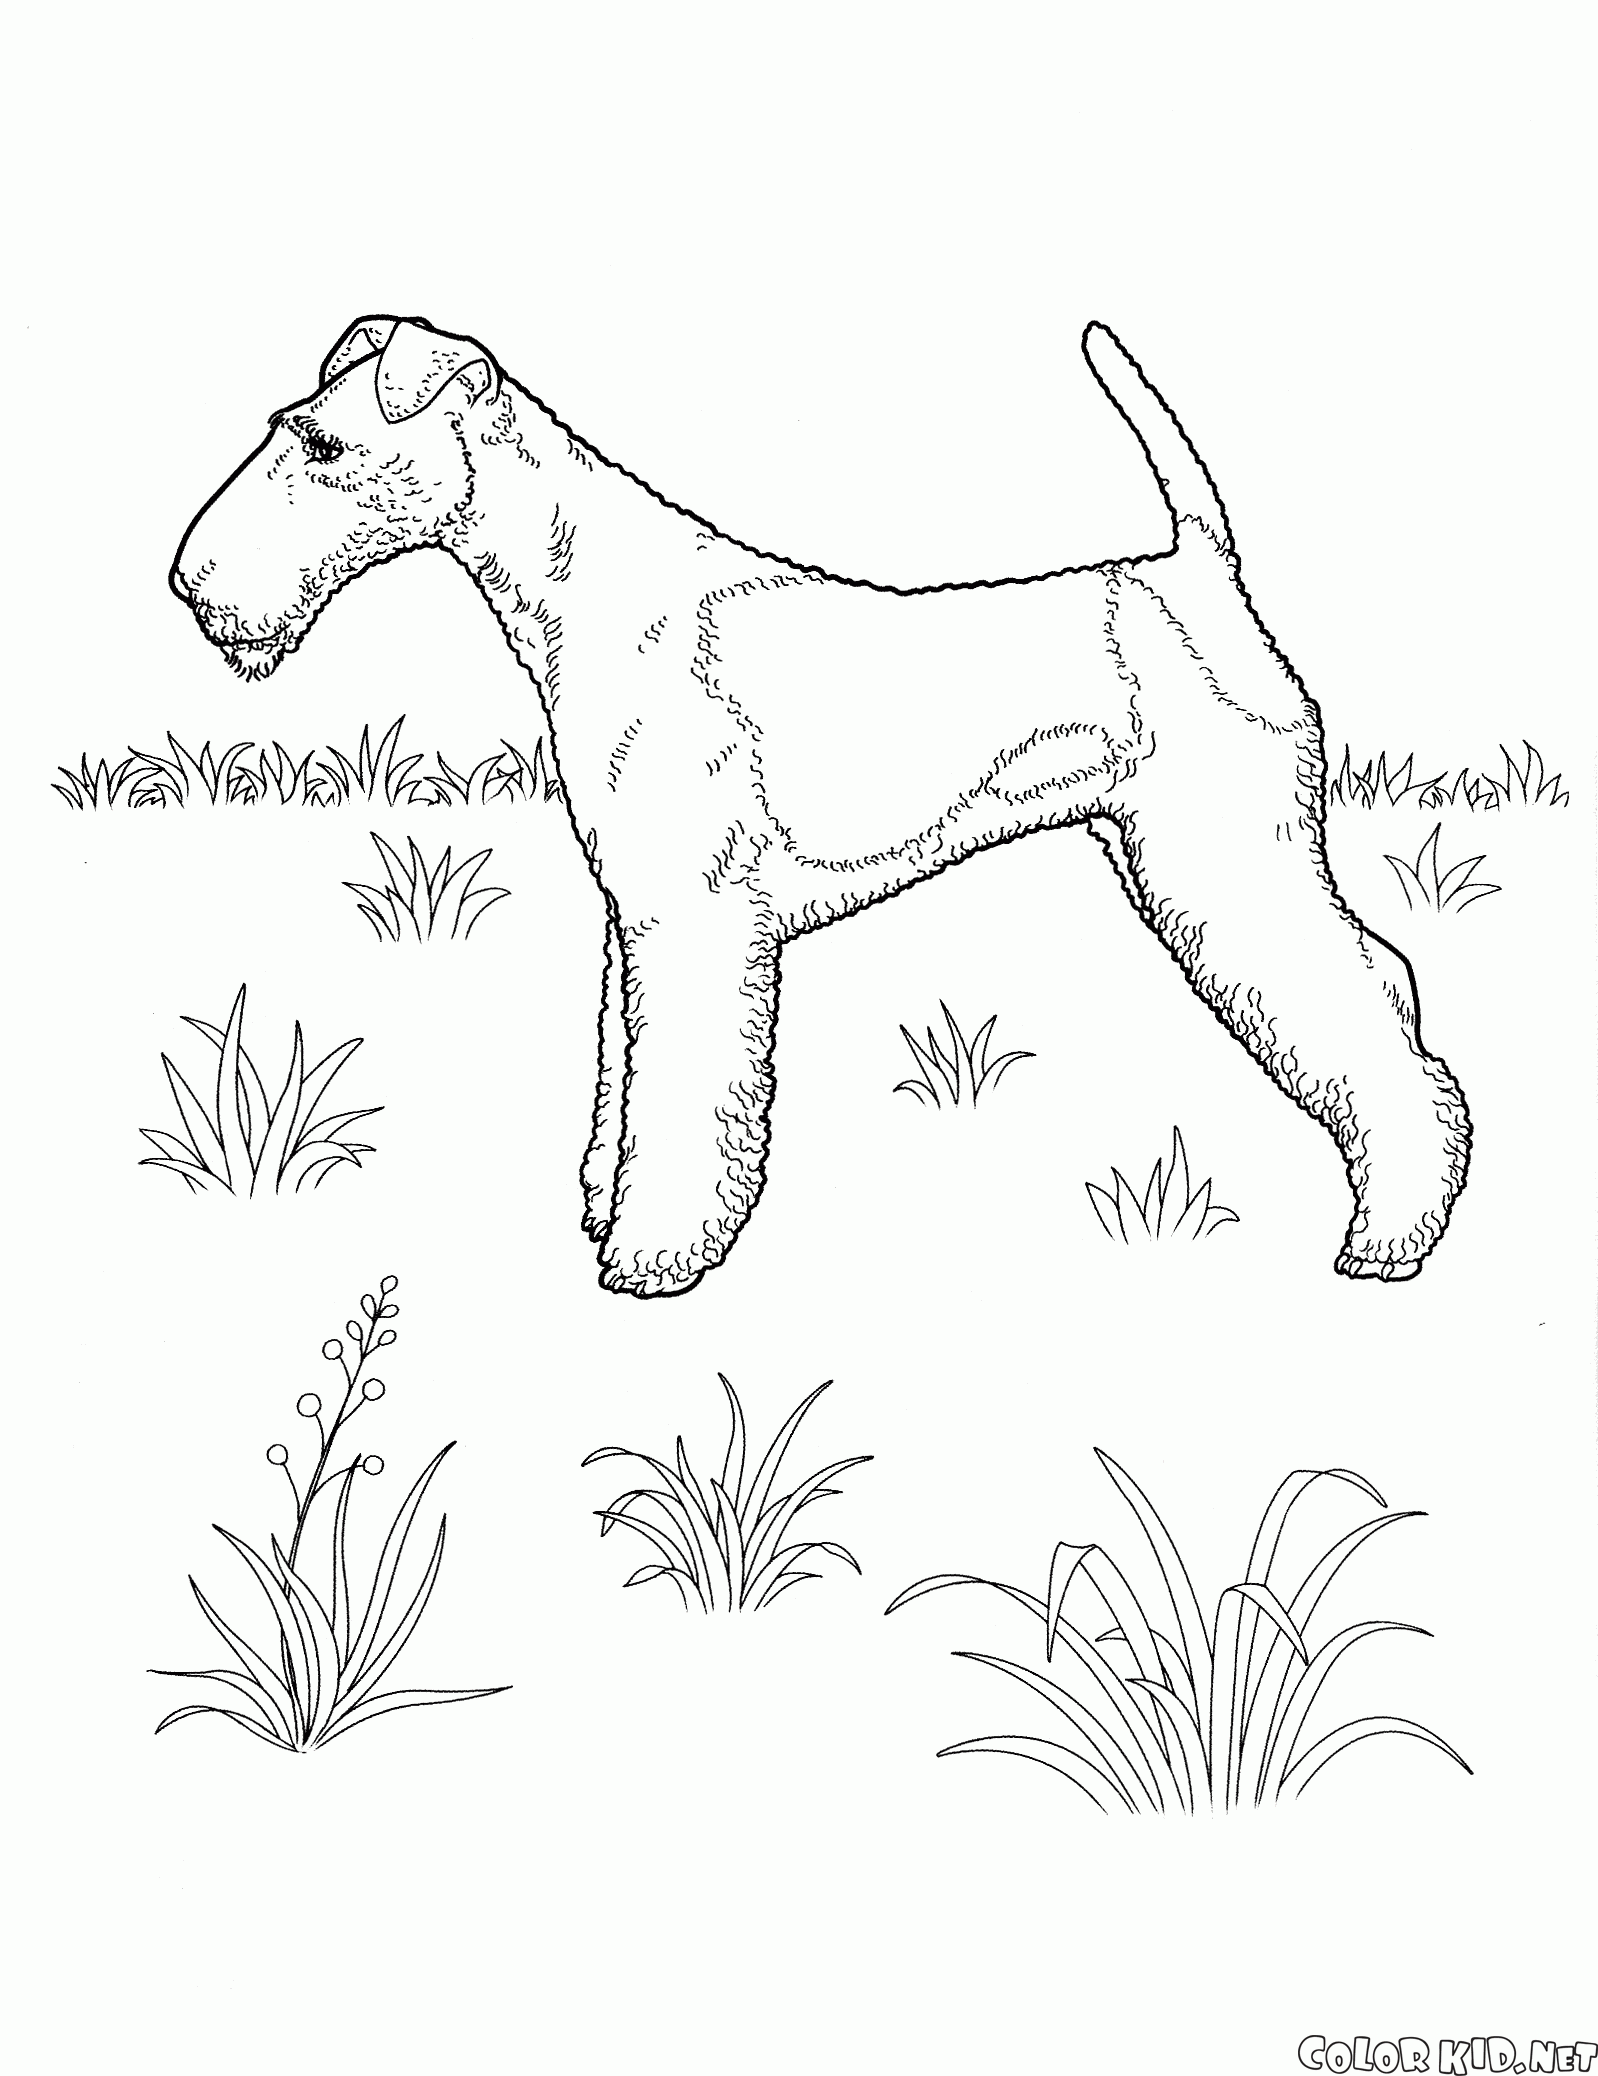 Coloring page - Dogs